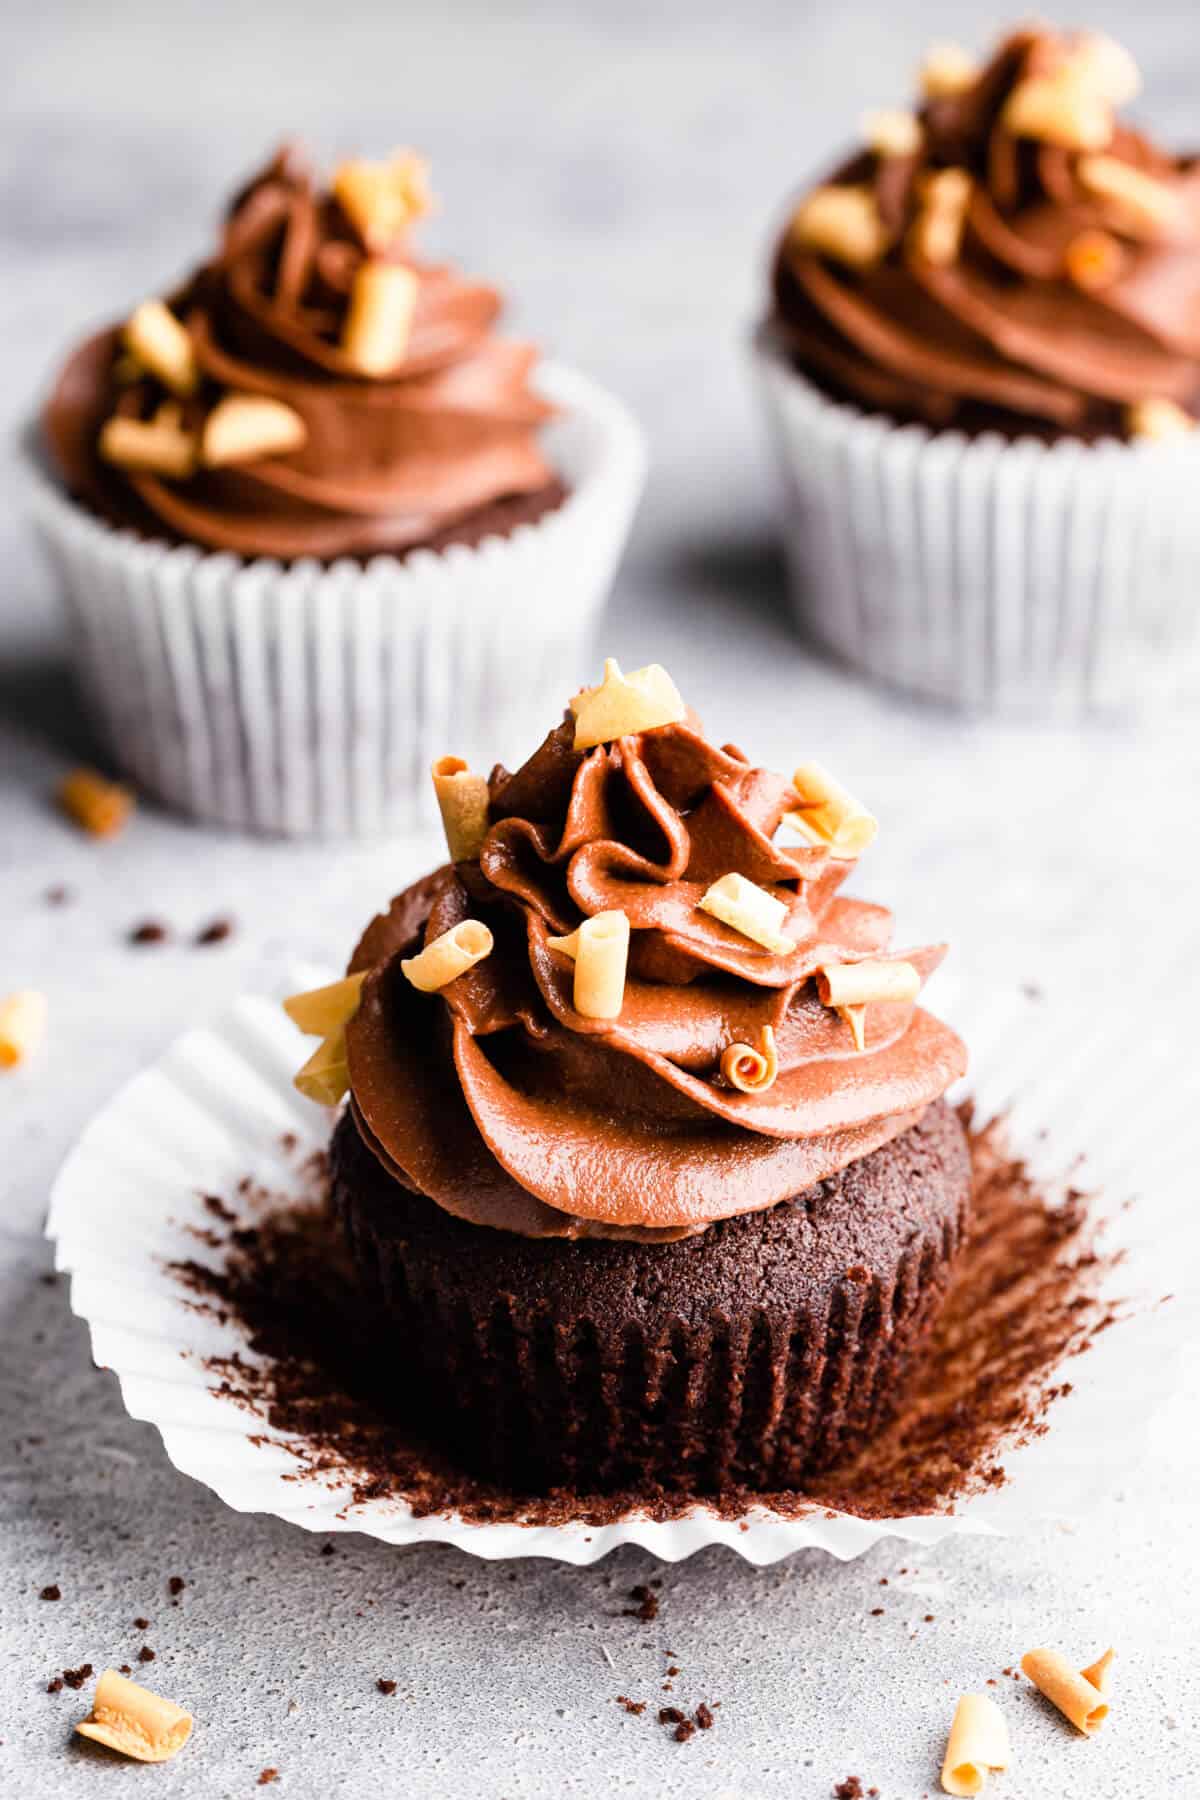 close up at a chocolate cupcake with buttercream unwrapped from its paper case